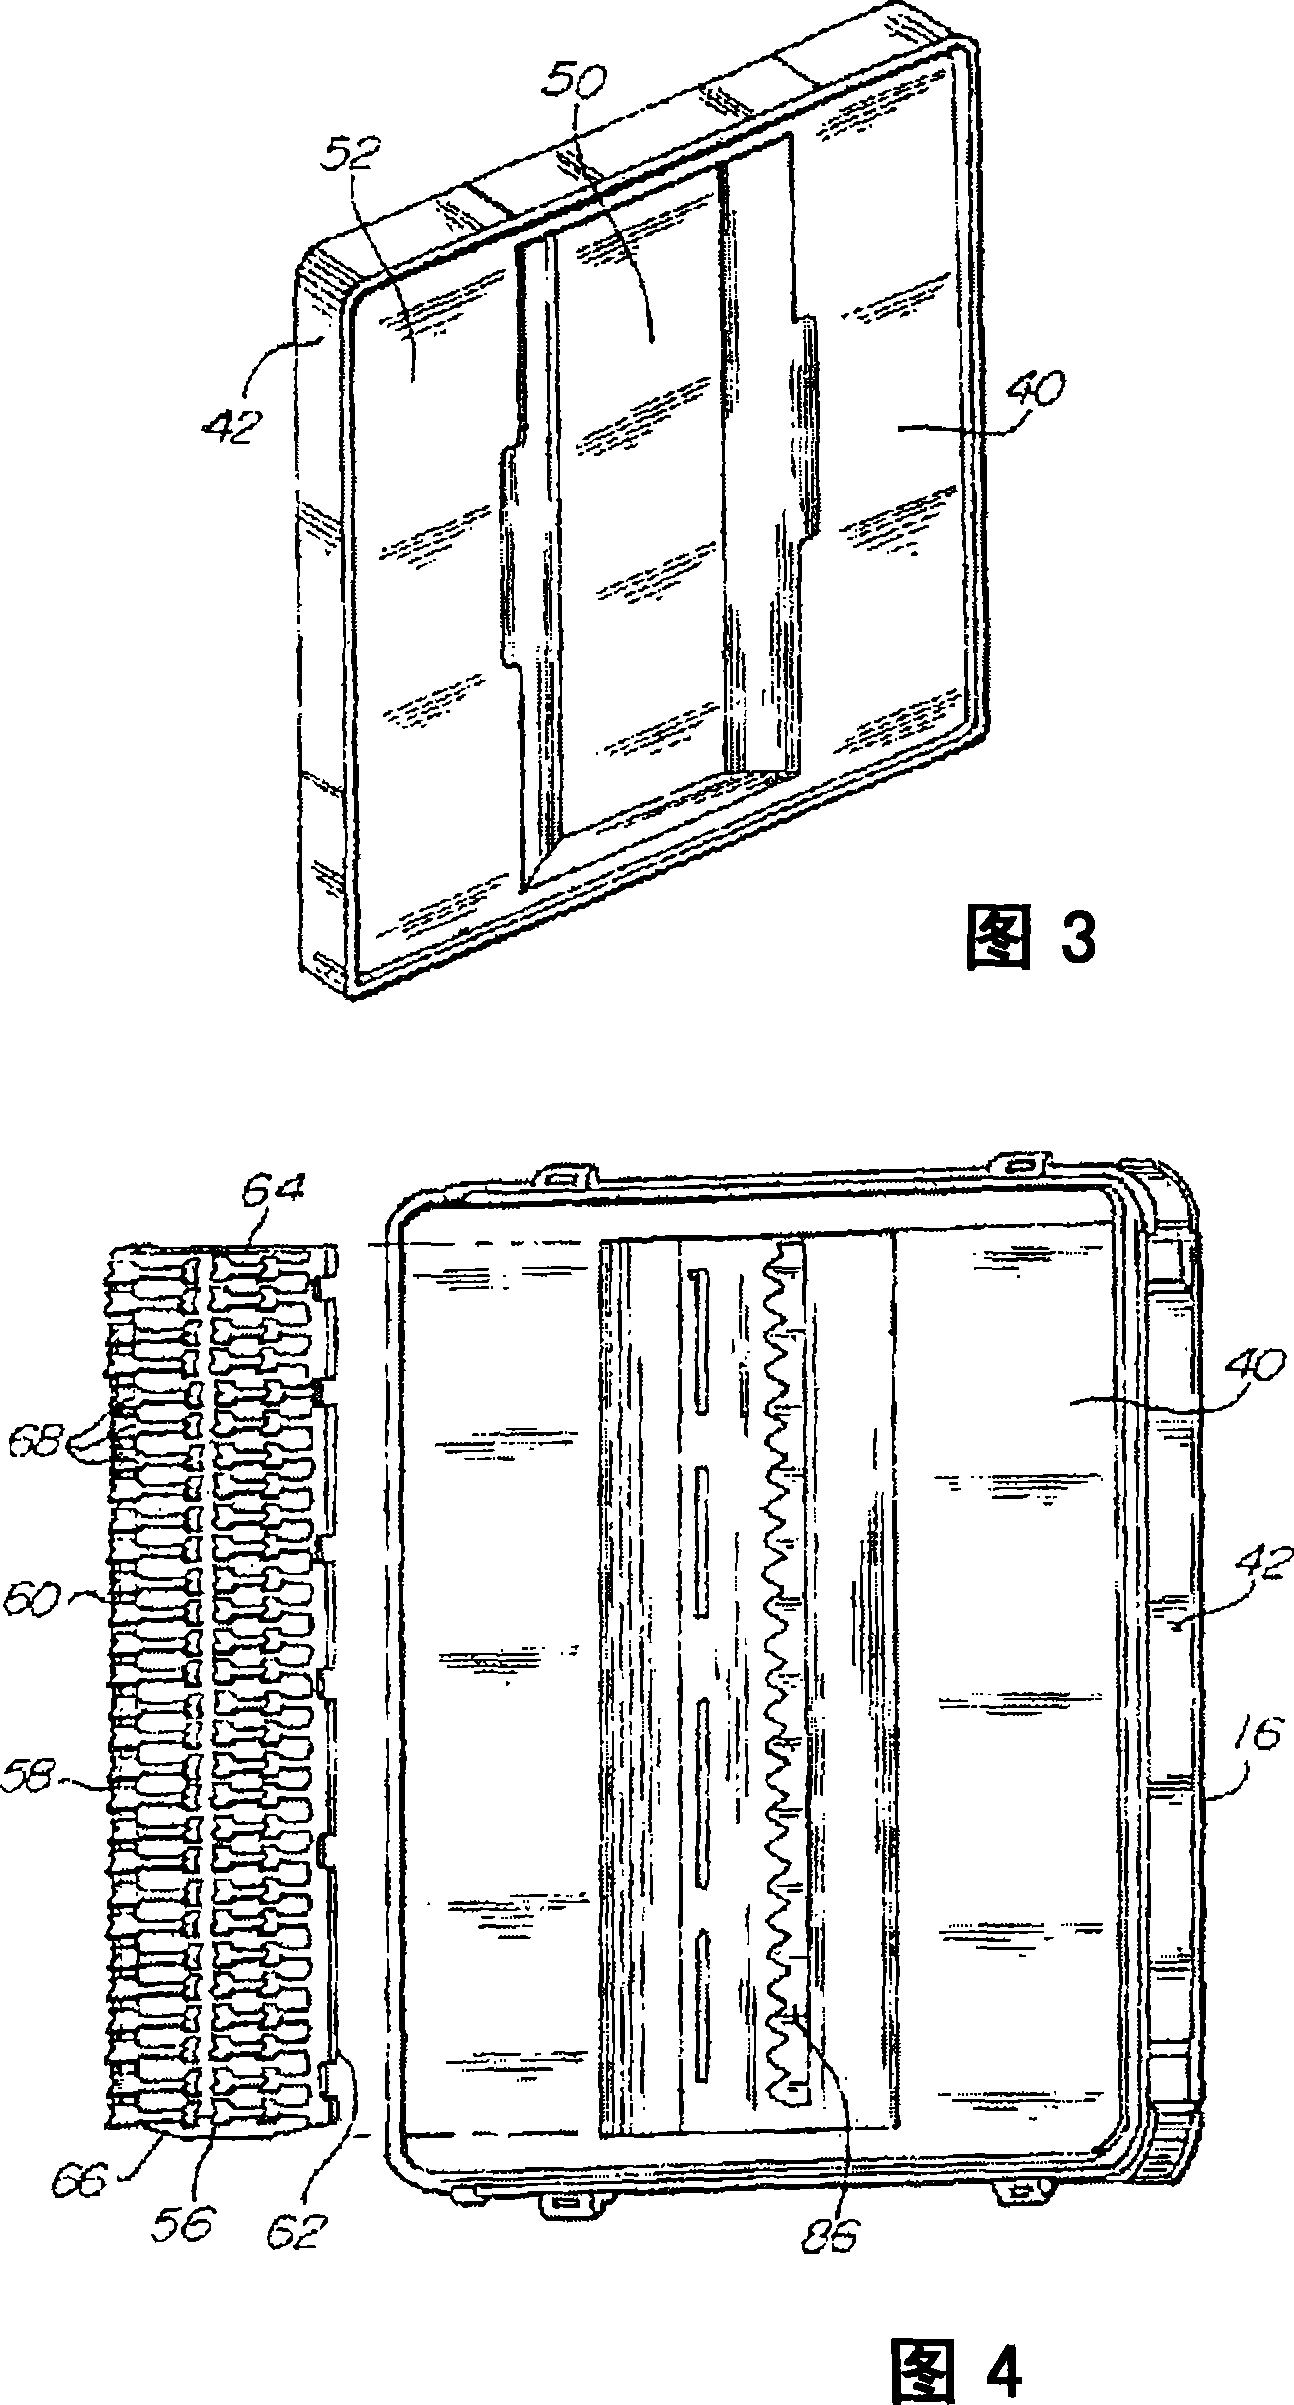 Wafer container with secondary wafer restraint system